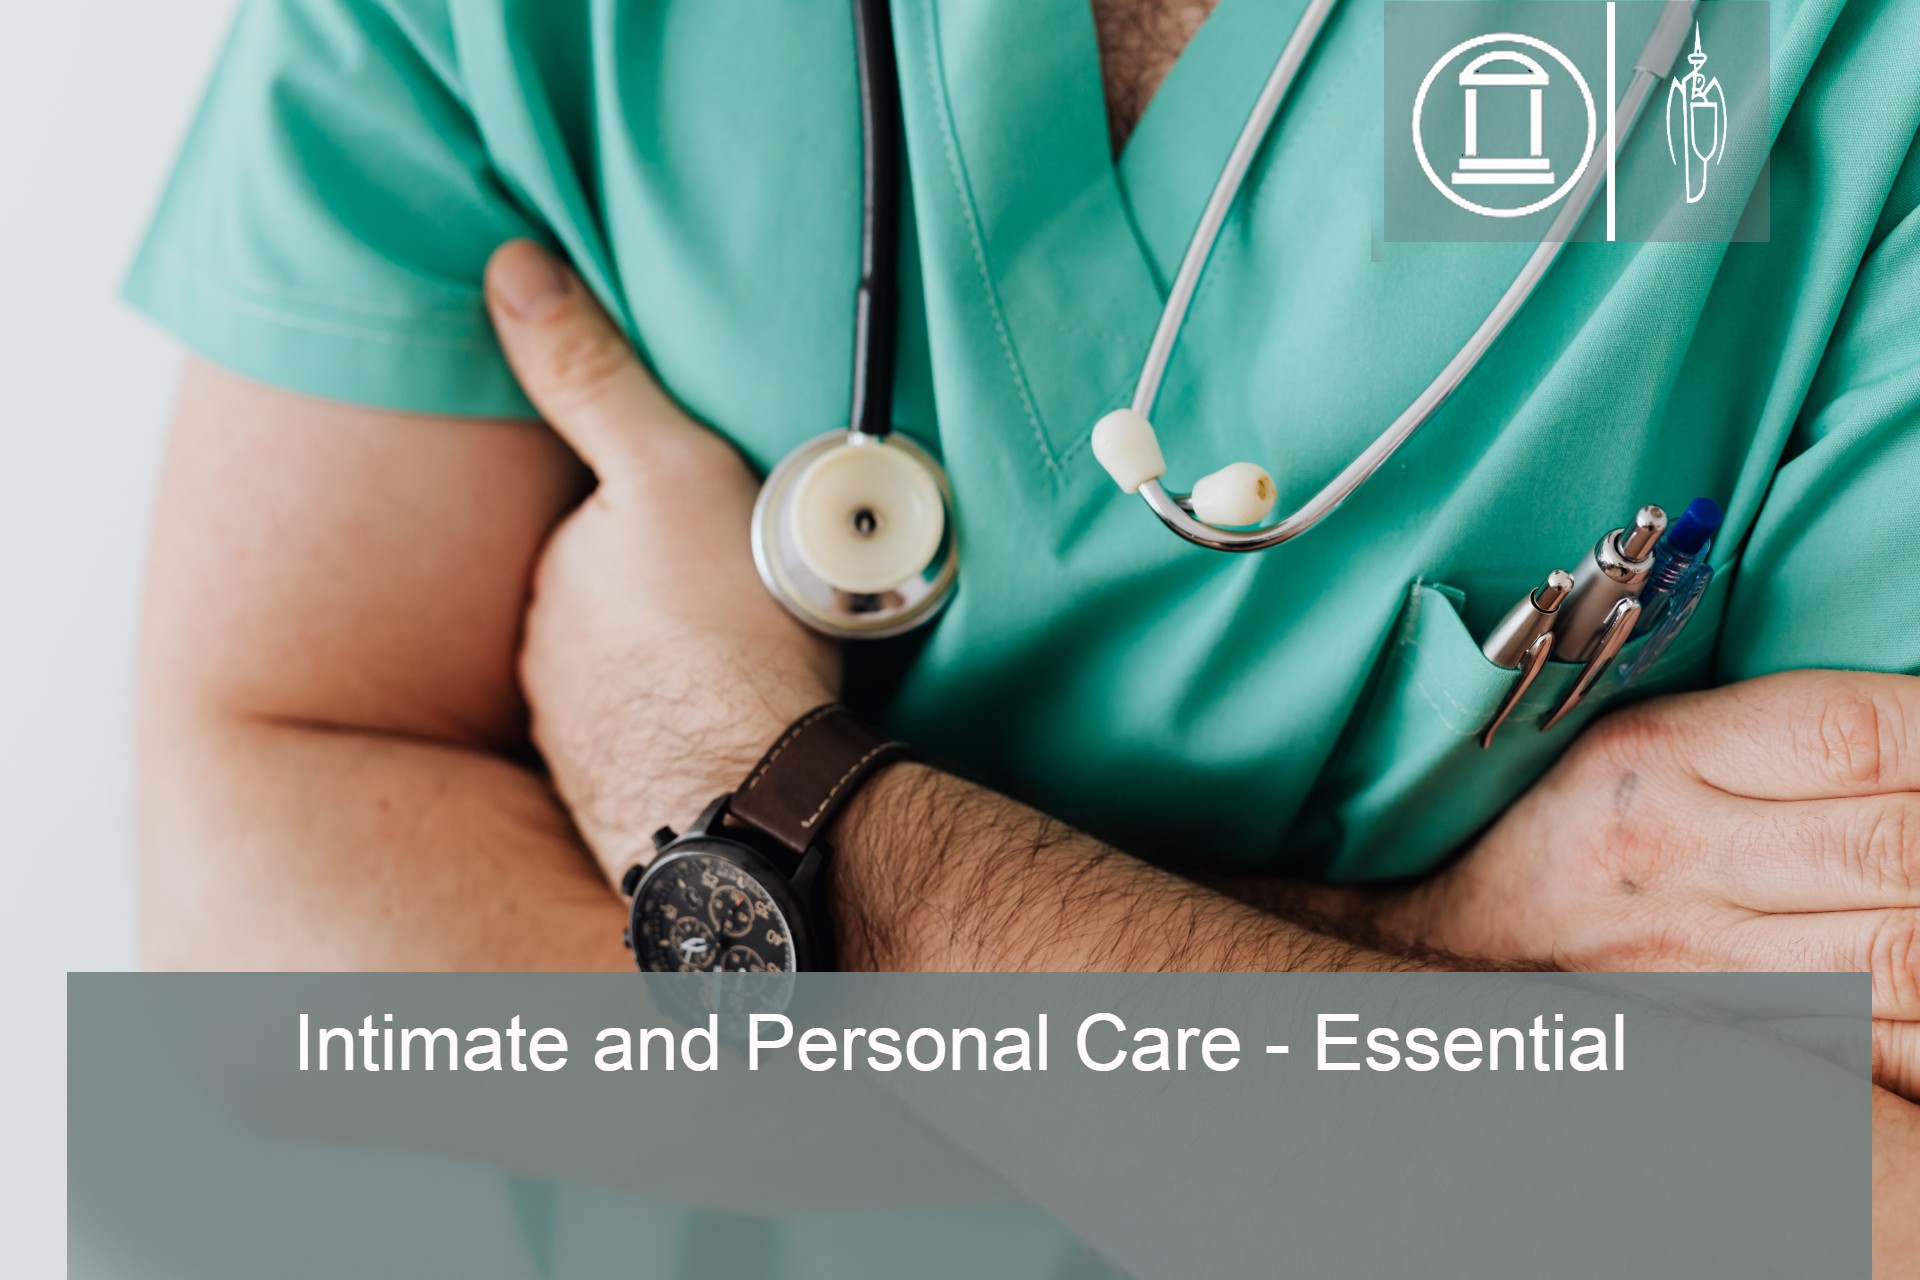 Intimate and Personal Care - Essential